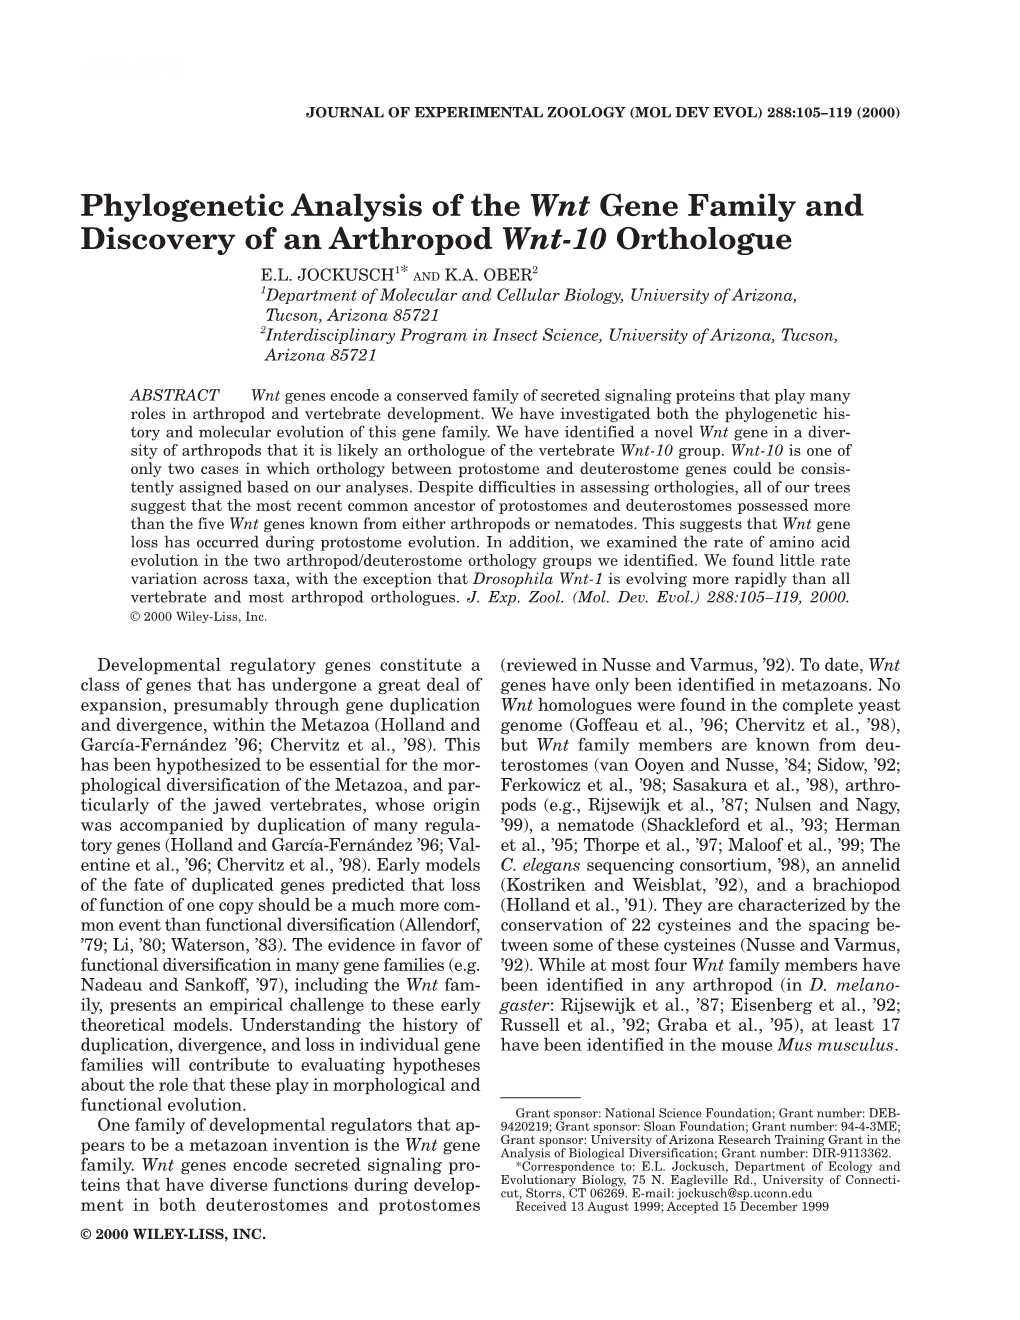 Phylogenetic Analysis of the Wnt Gene Family and Discovery of an Arthropod Wnt-10 Orthologue